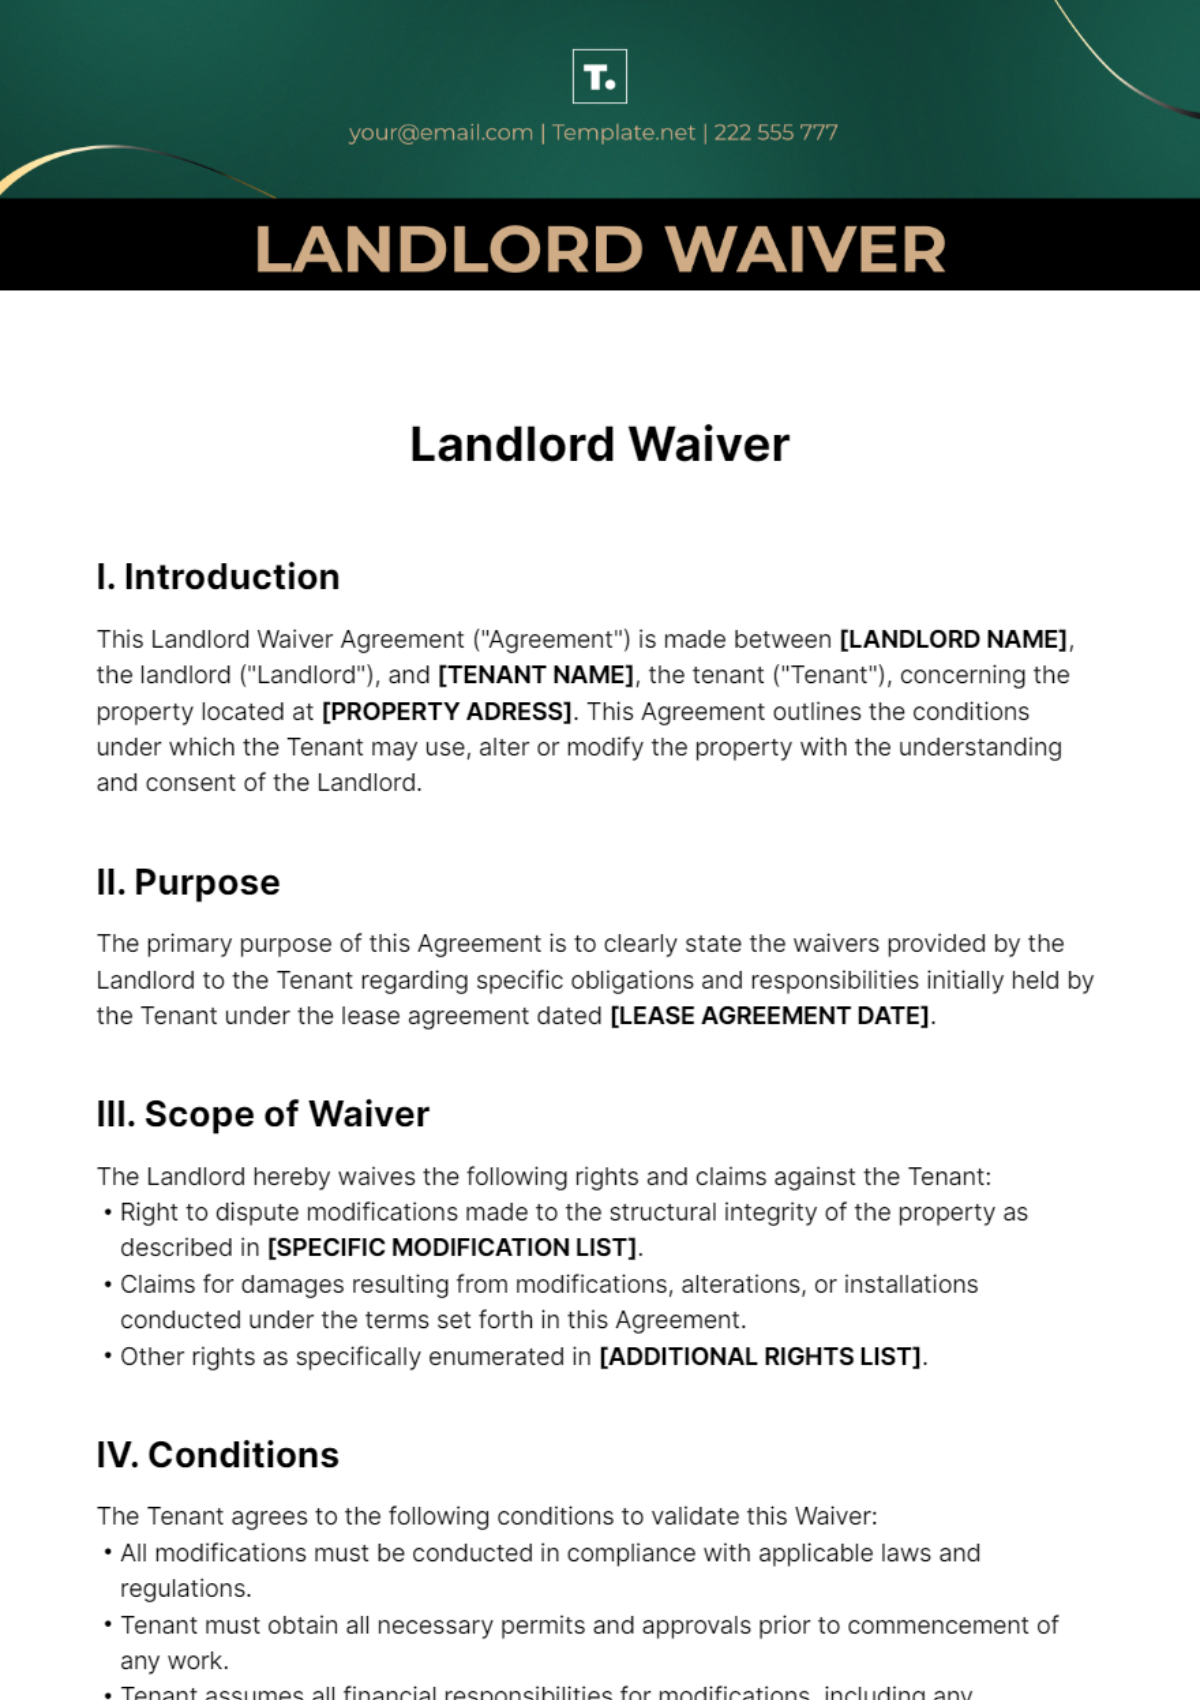 Free Landlord Waiver Template